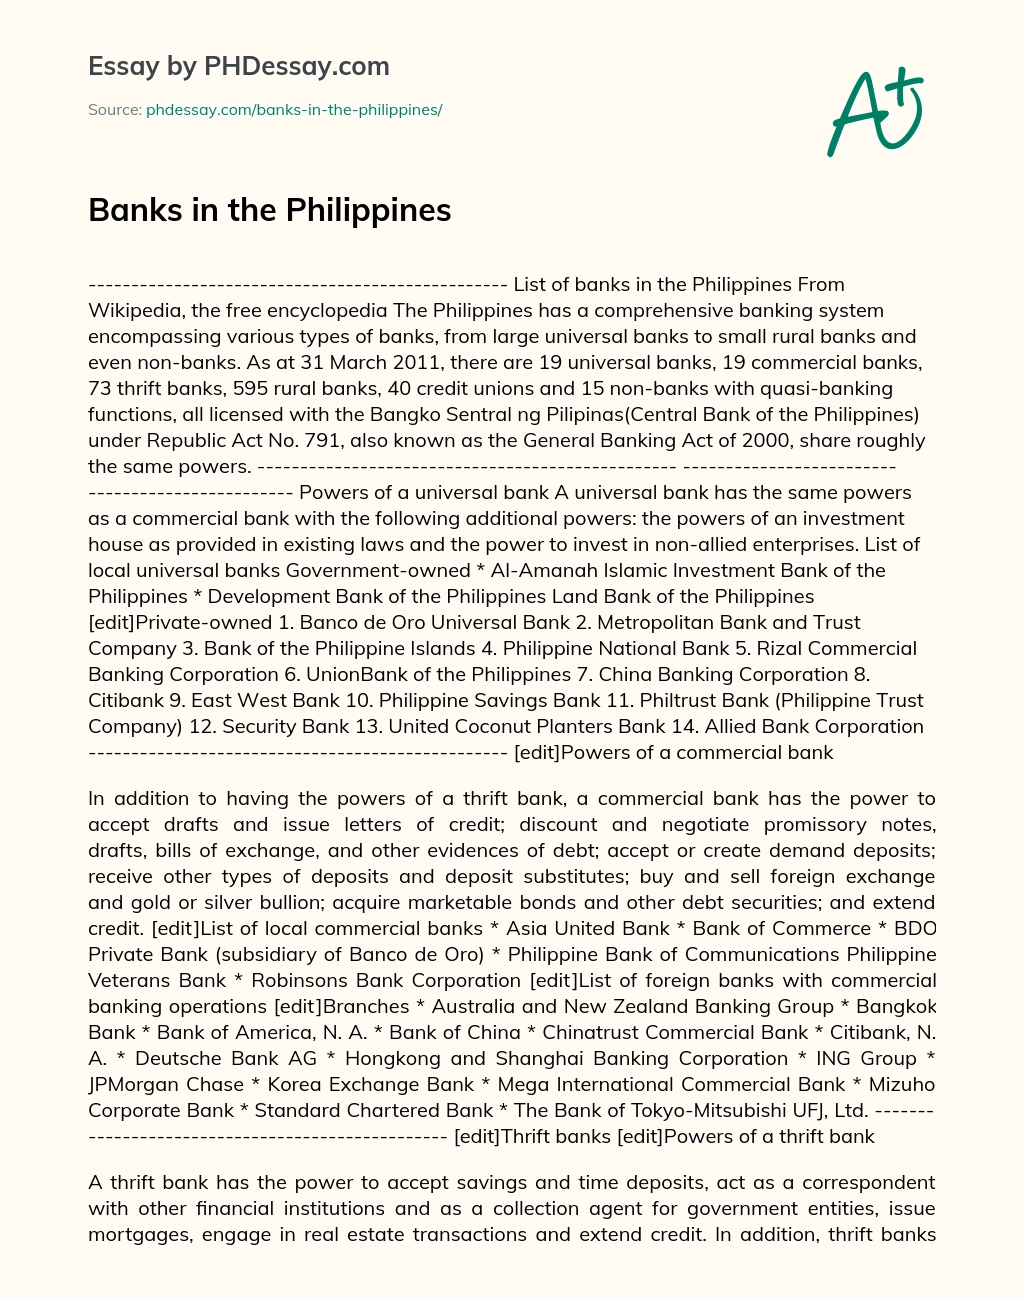 Banks in the Philippines essay